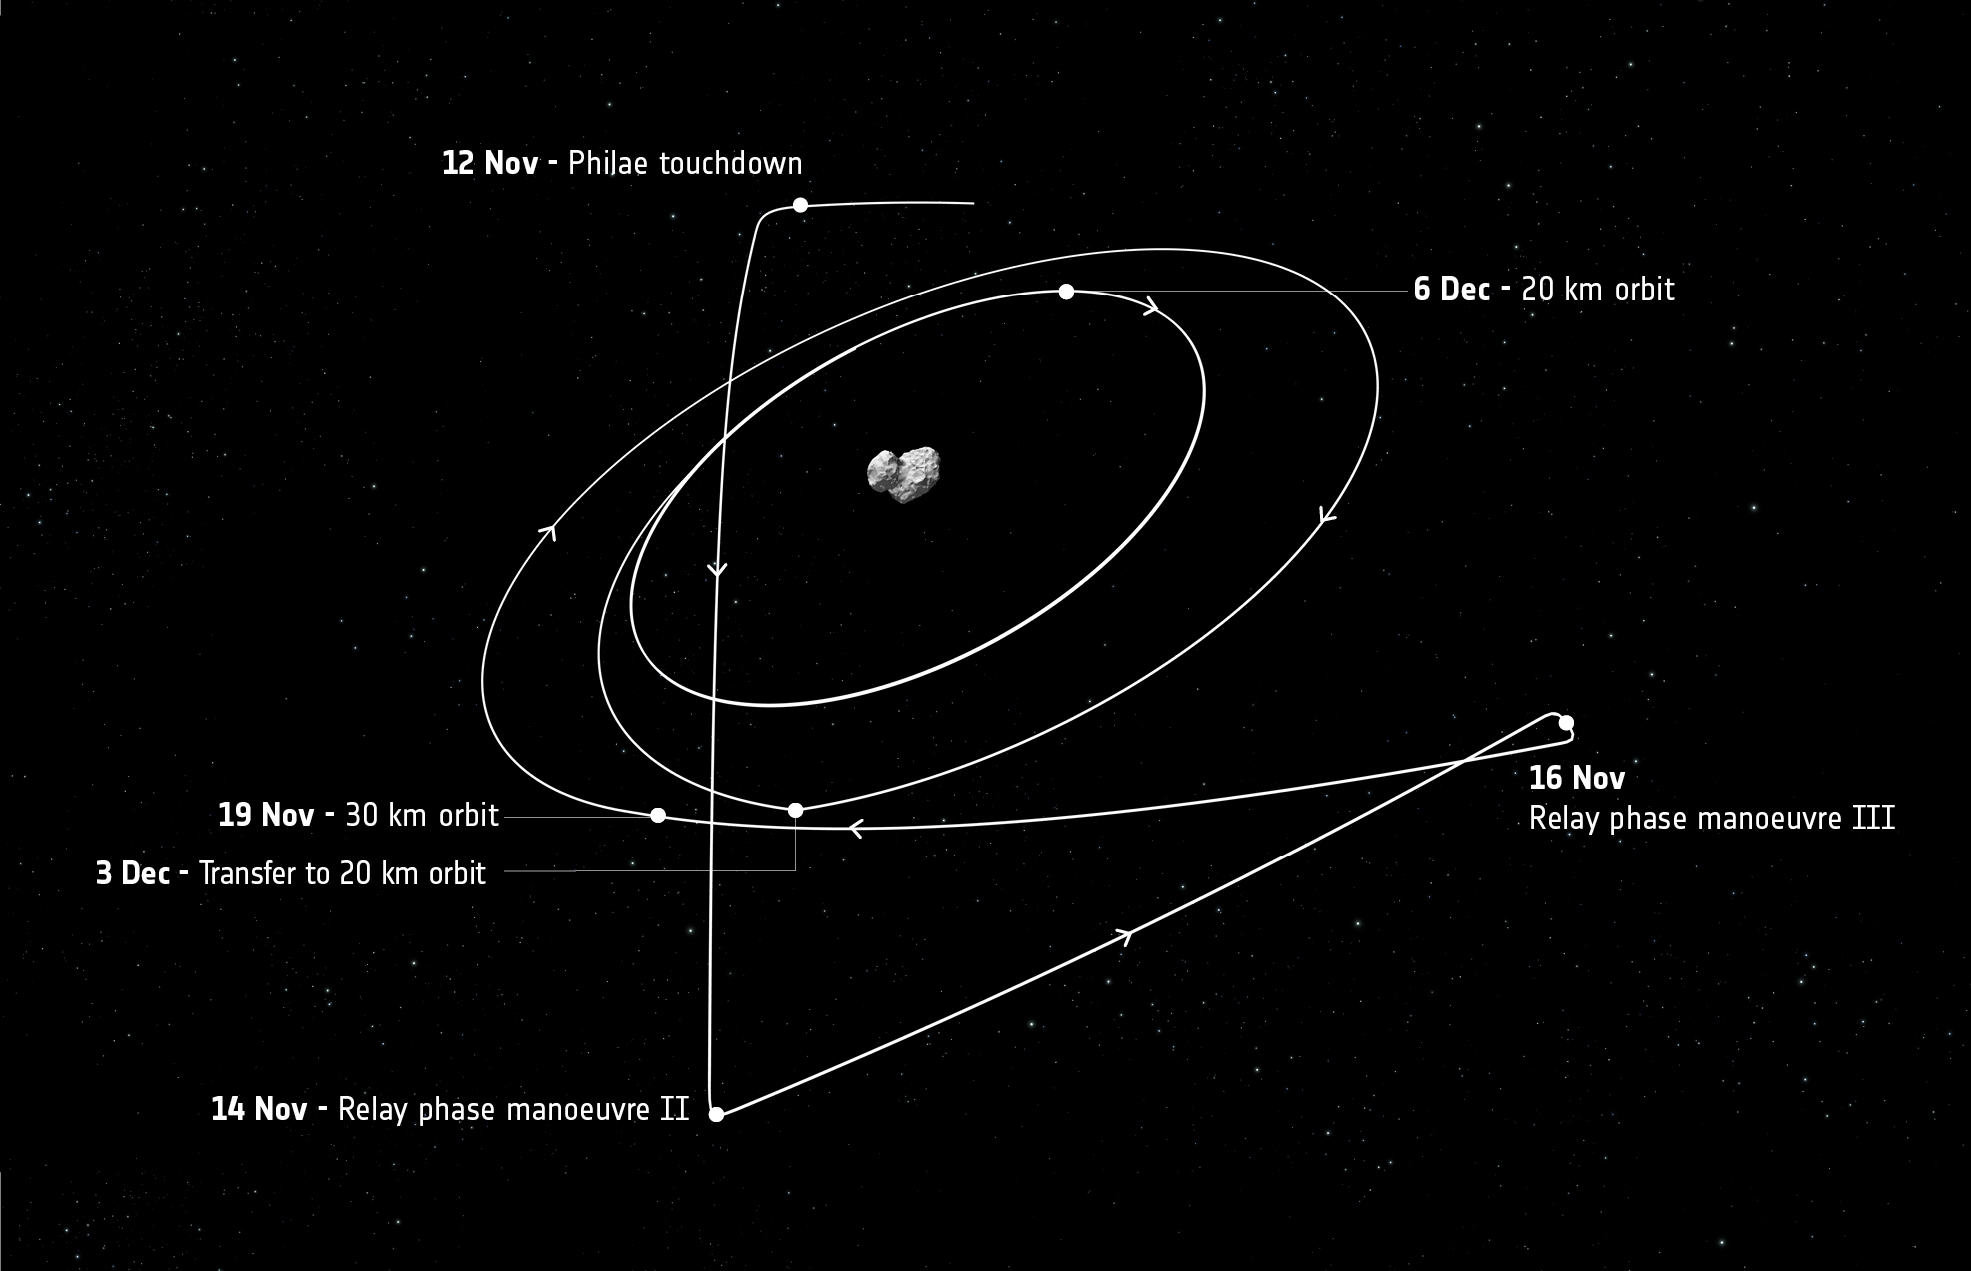 Labelled trajectory of Rosetta’s orbit, focusing on the manoeuvres after 12 November 2014. Credit: ESA